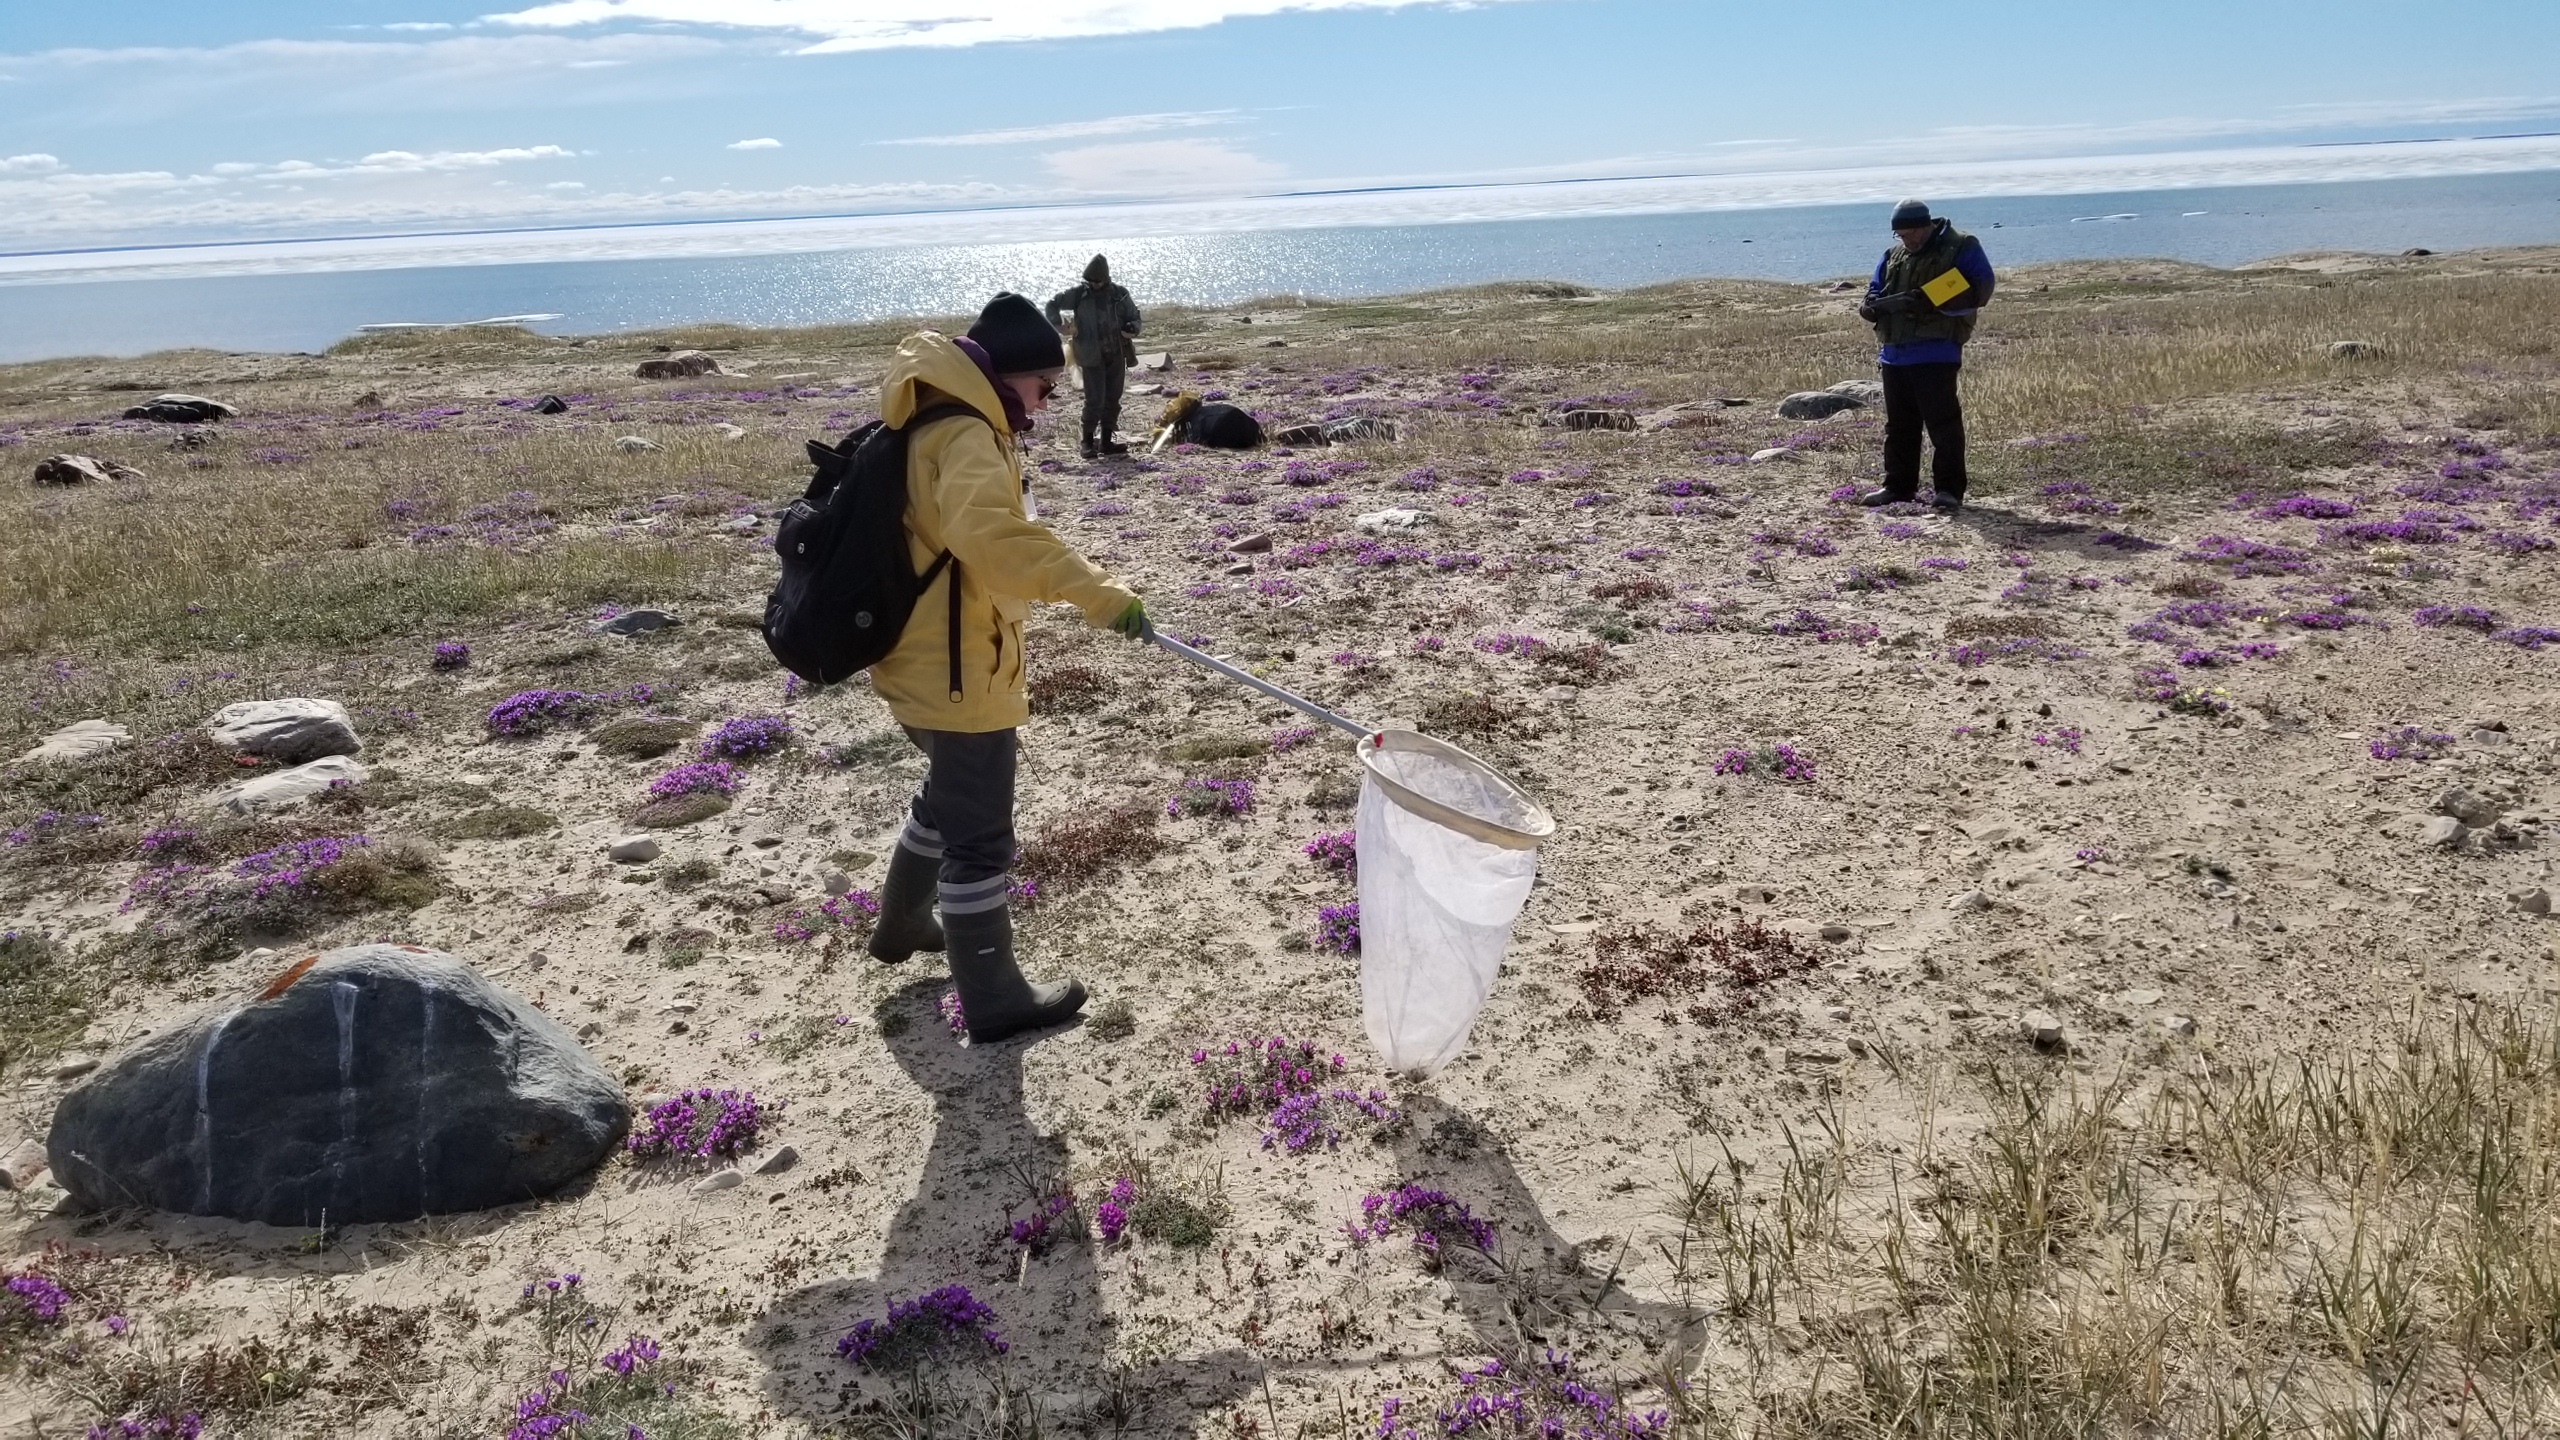 Four members of an Arctic BIOSCAN team scan the ground for arthropods